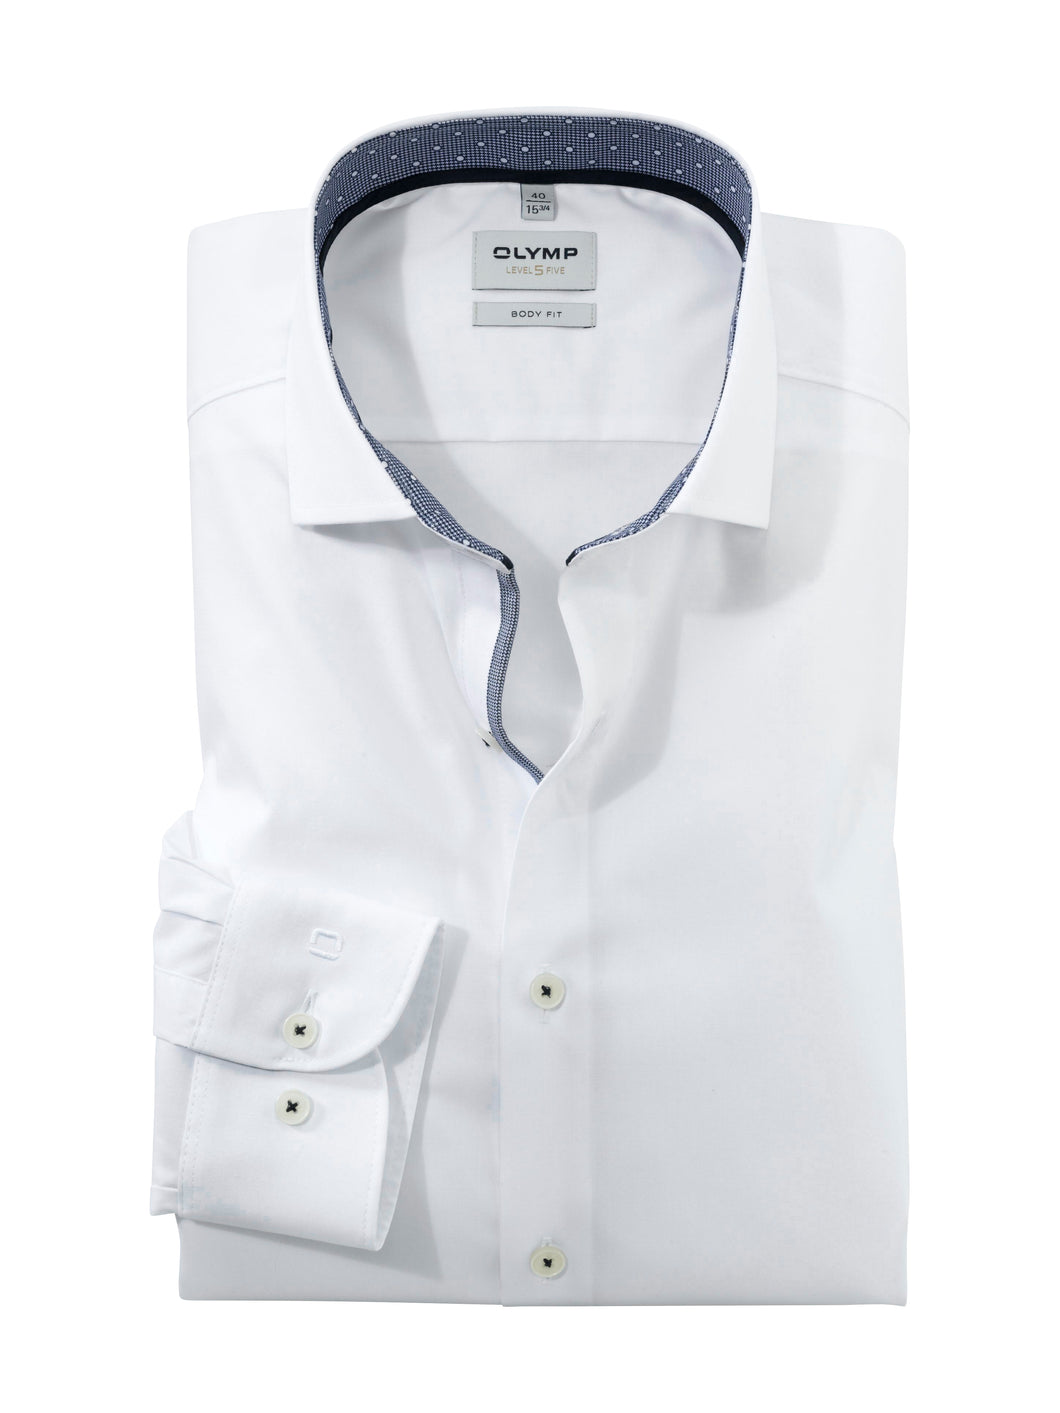 OLYMP Level 5 Body Fit Shirt in White 206524